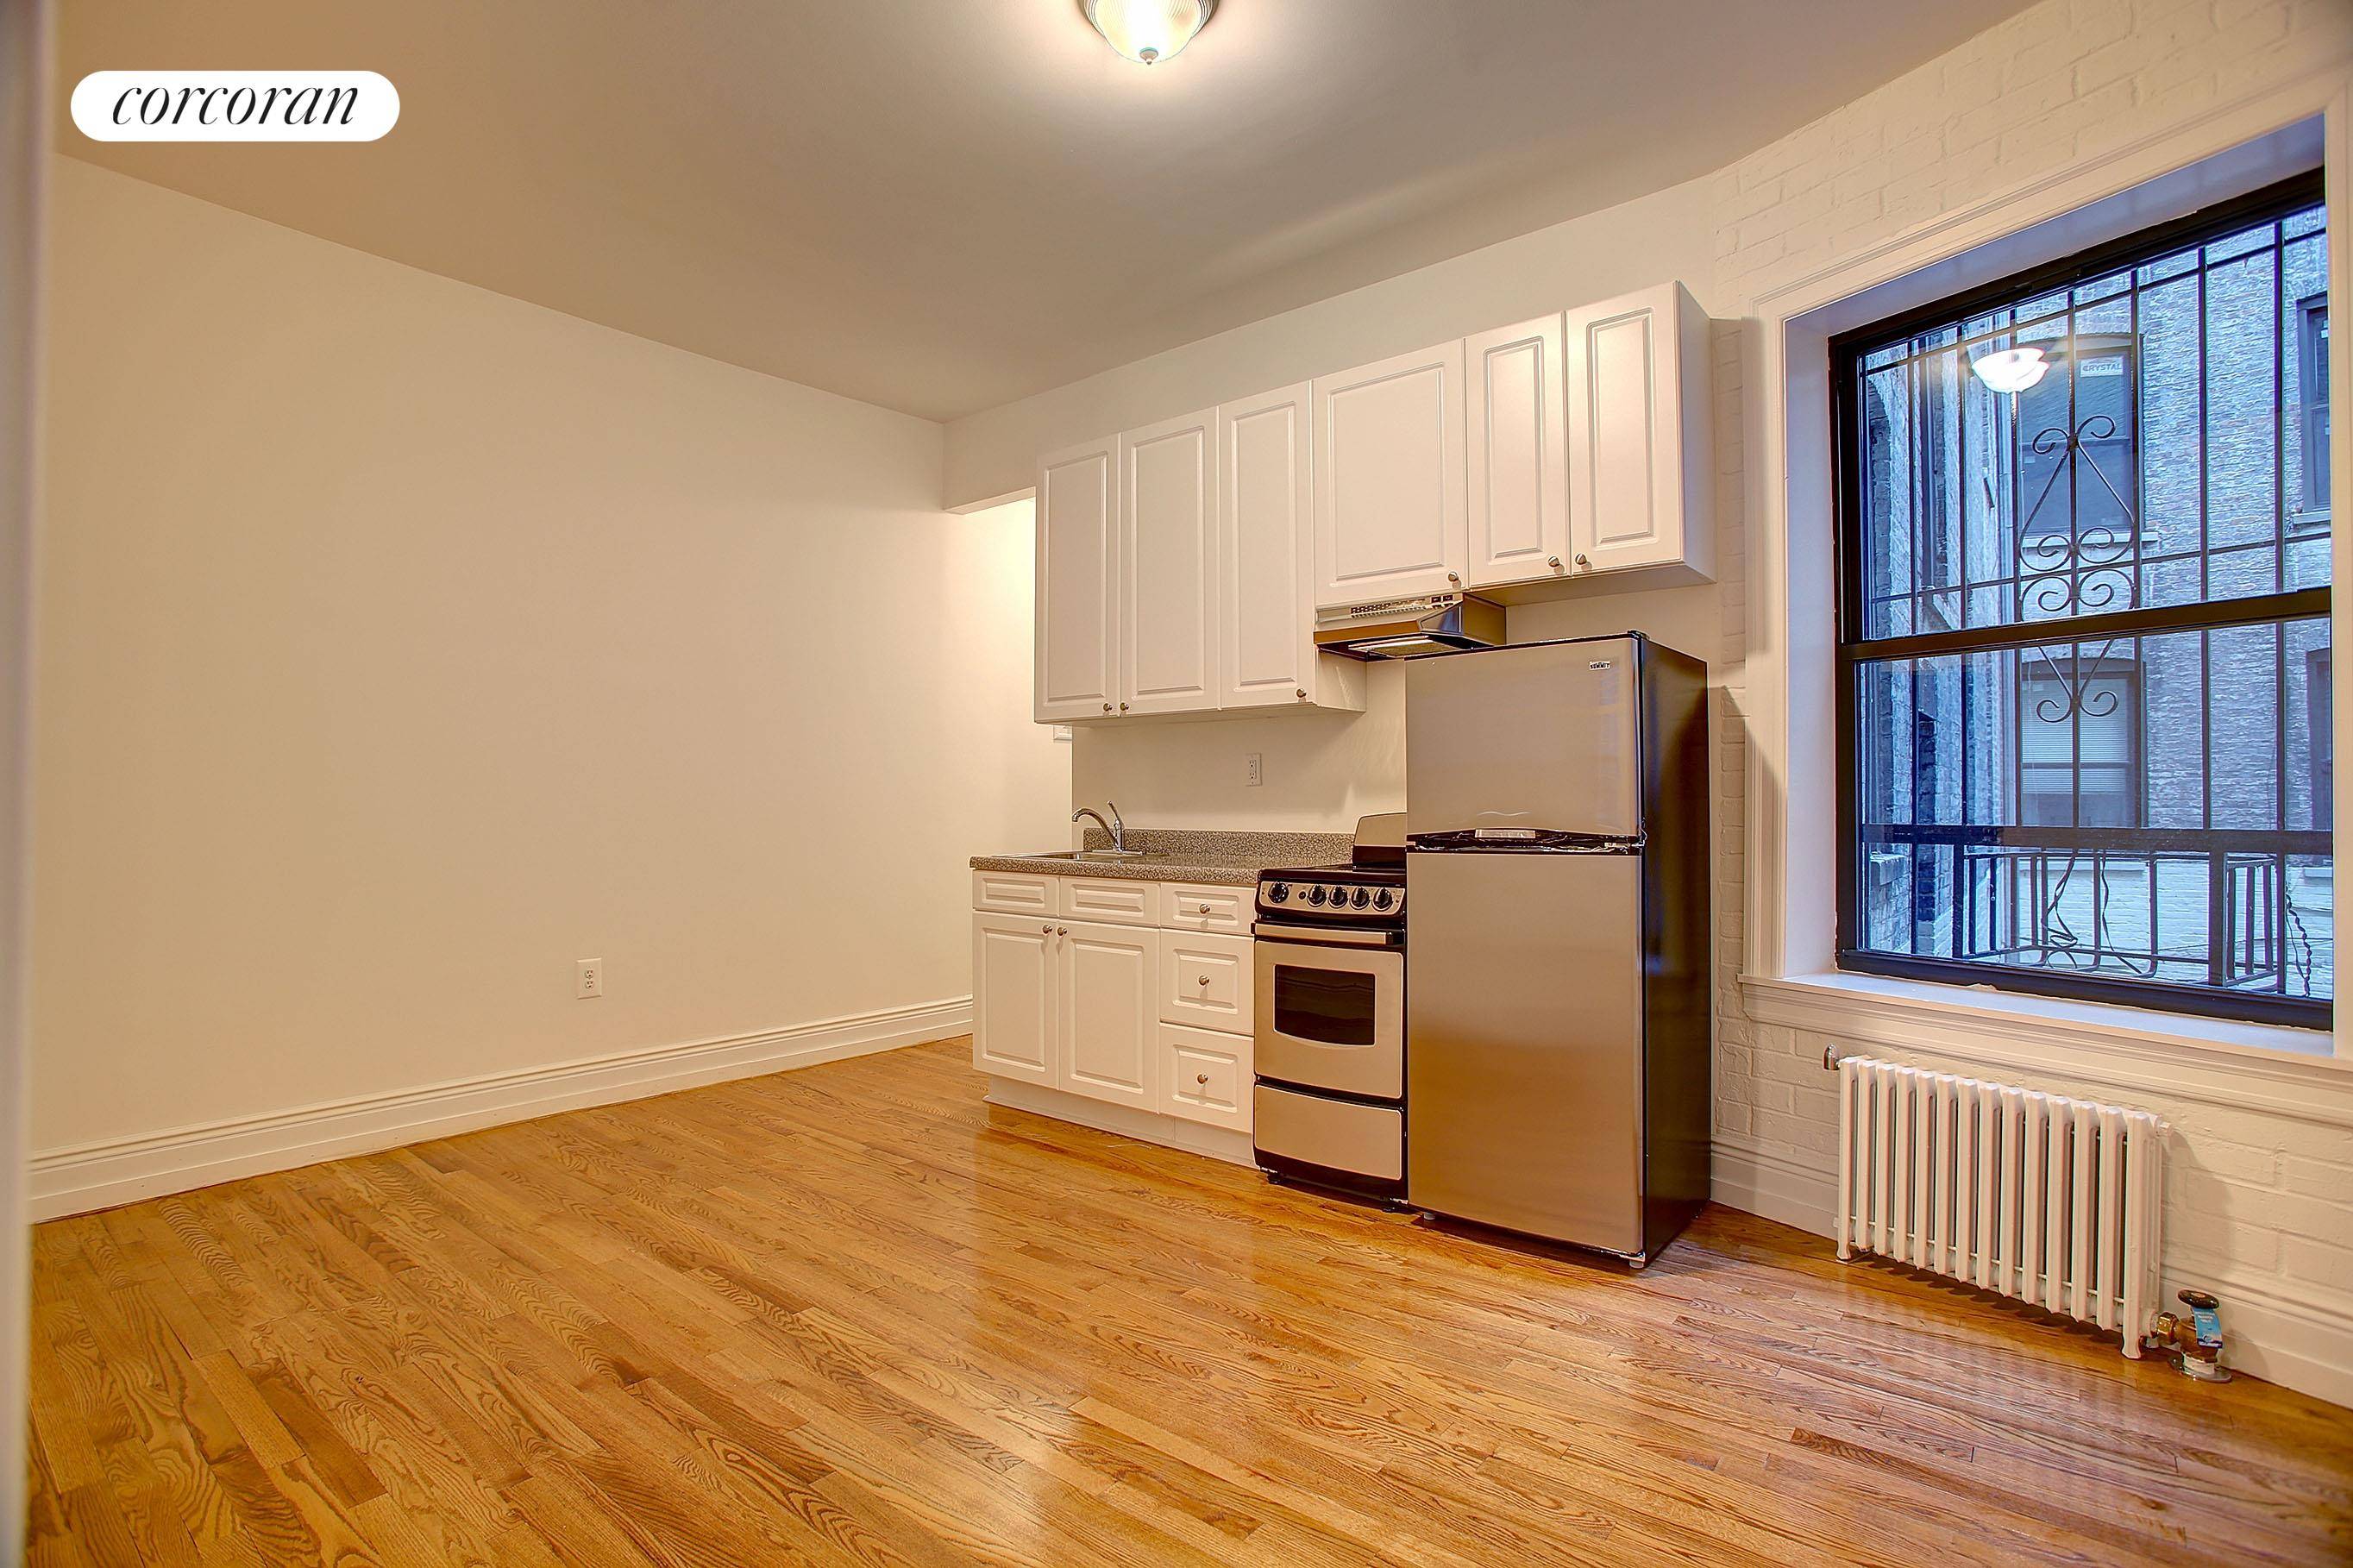 Thoroughly renovated three bedroom five minutes from Columbia University.